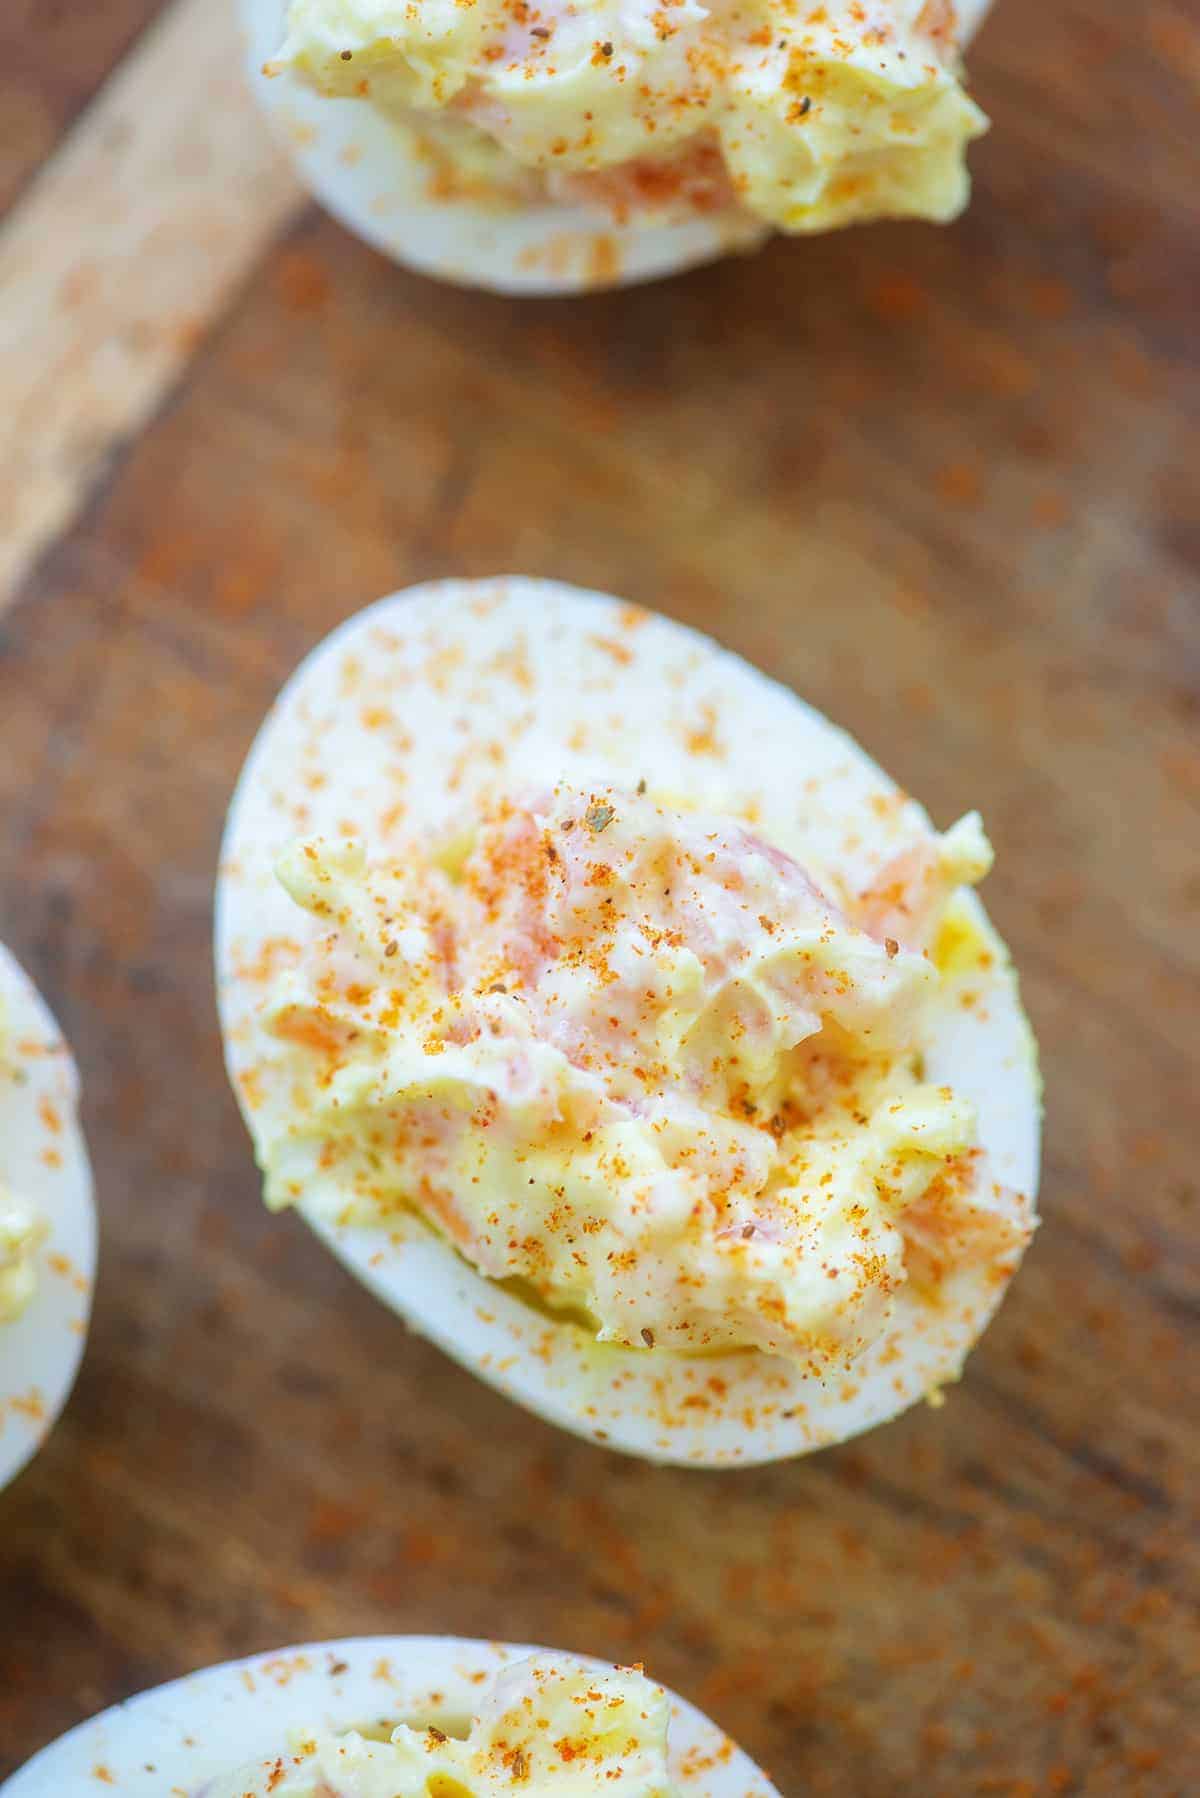 deviled egg with smoked salmon and Old Bay seasoning on top